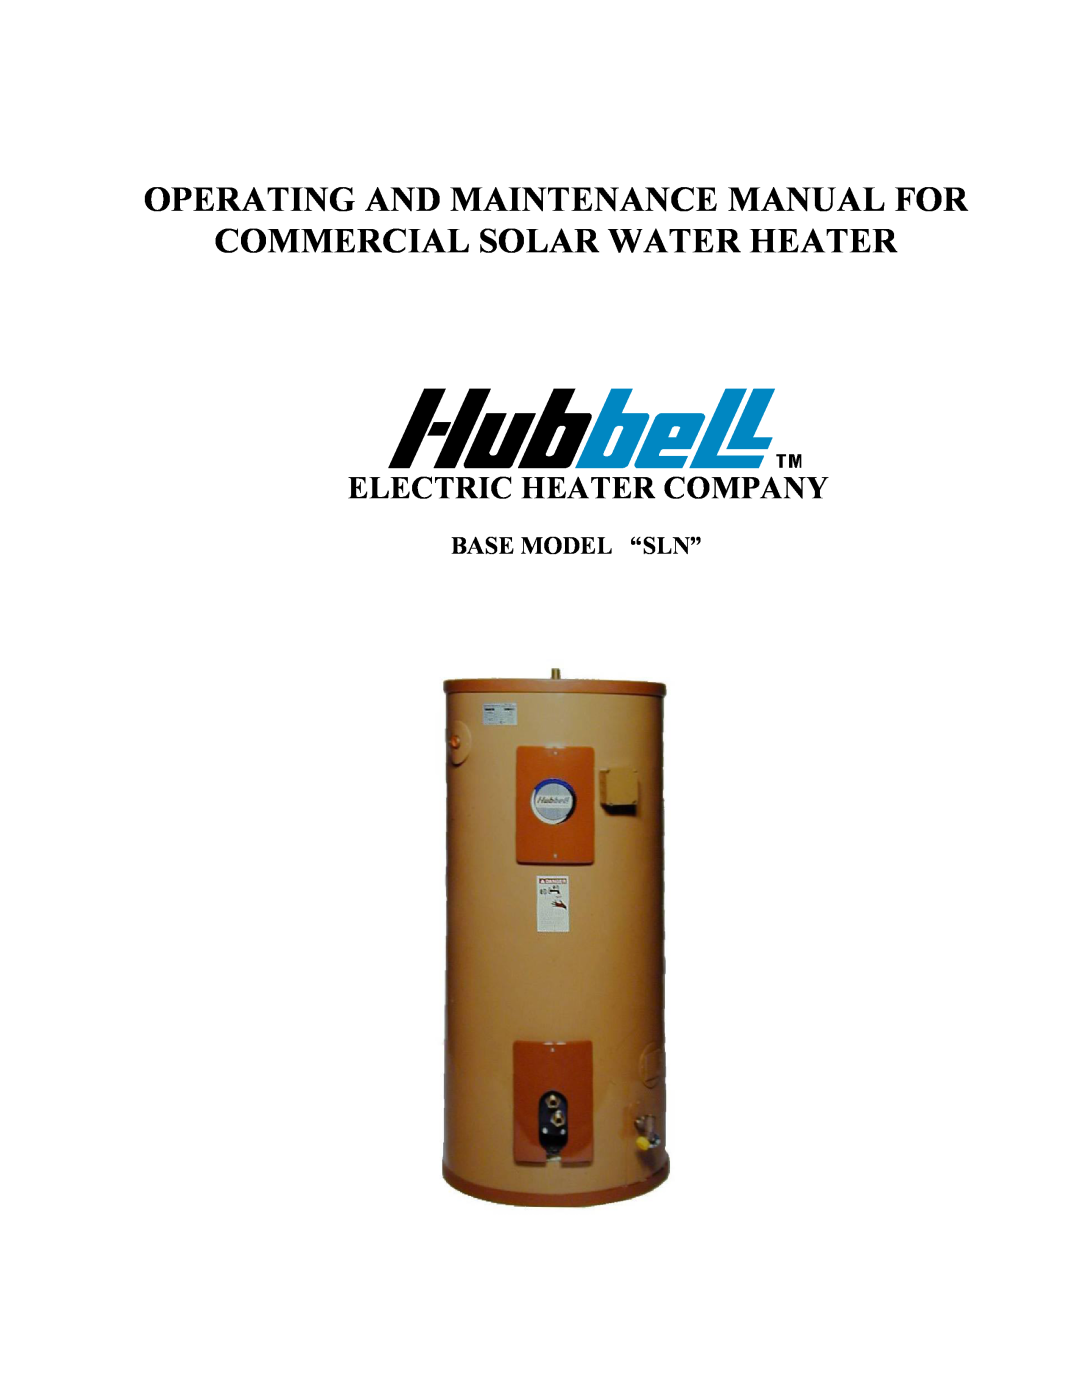 Hubbell Electric Heater Company SLN manual Base Model “Sln”, Operating And Maintenance Manual For, Electric Heater Company 